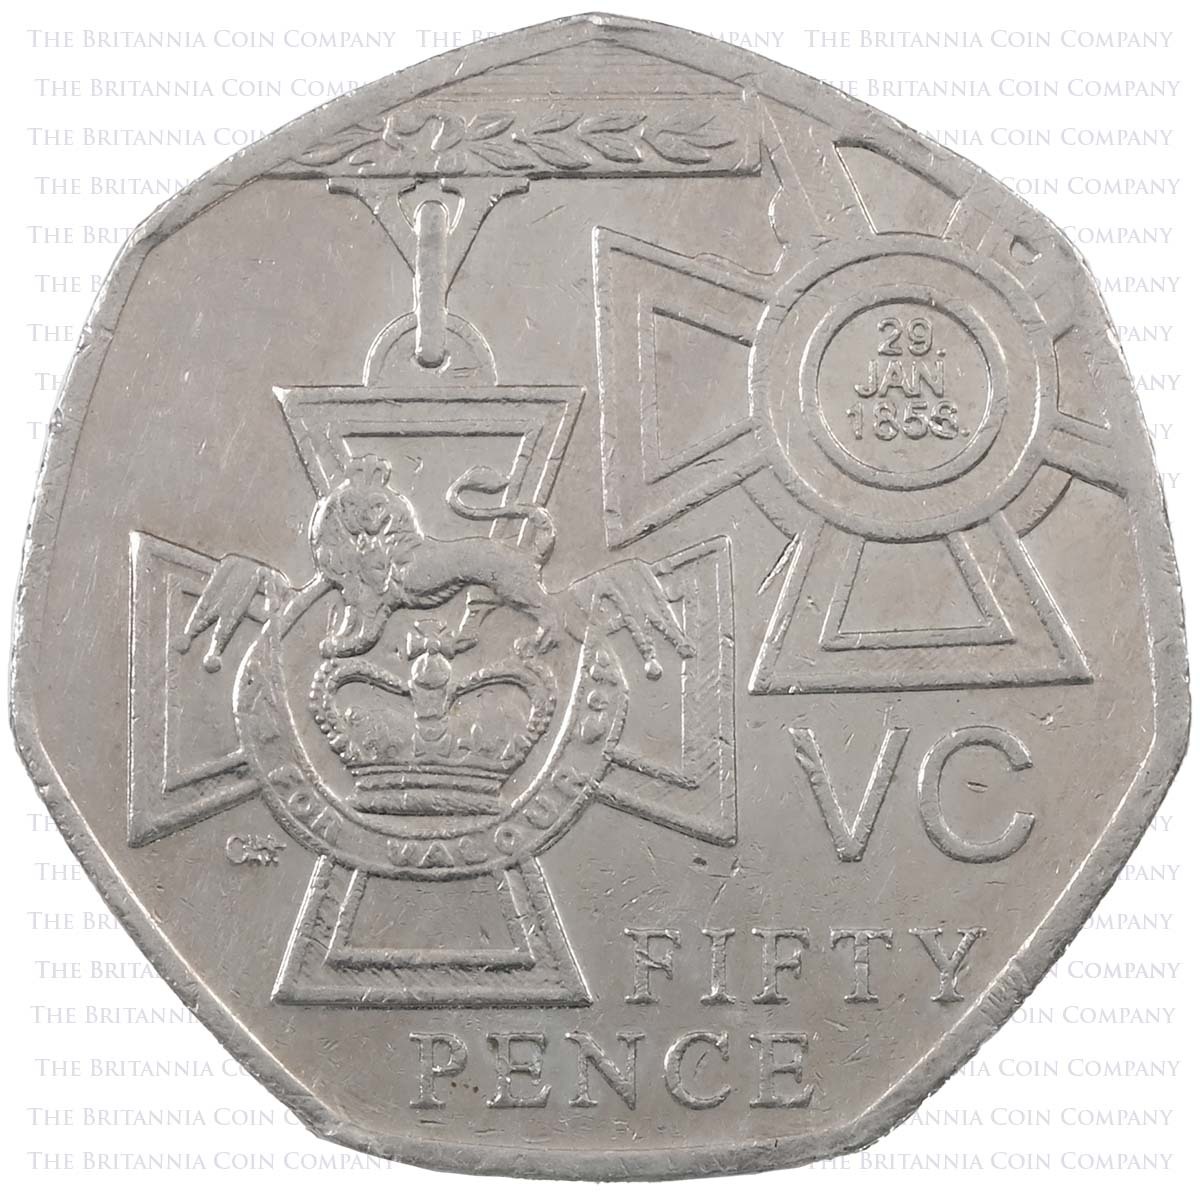 2006 Victoria Cross Medal Circulated Fifty Pence Coin Reverse